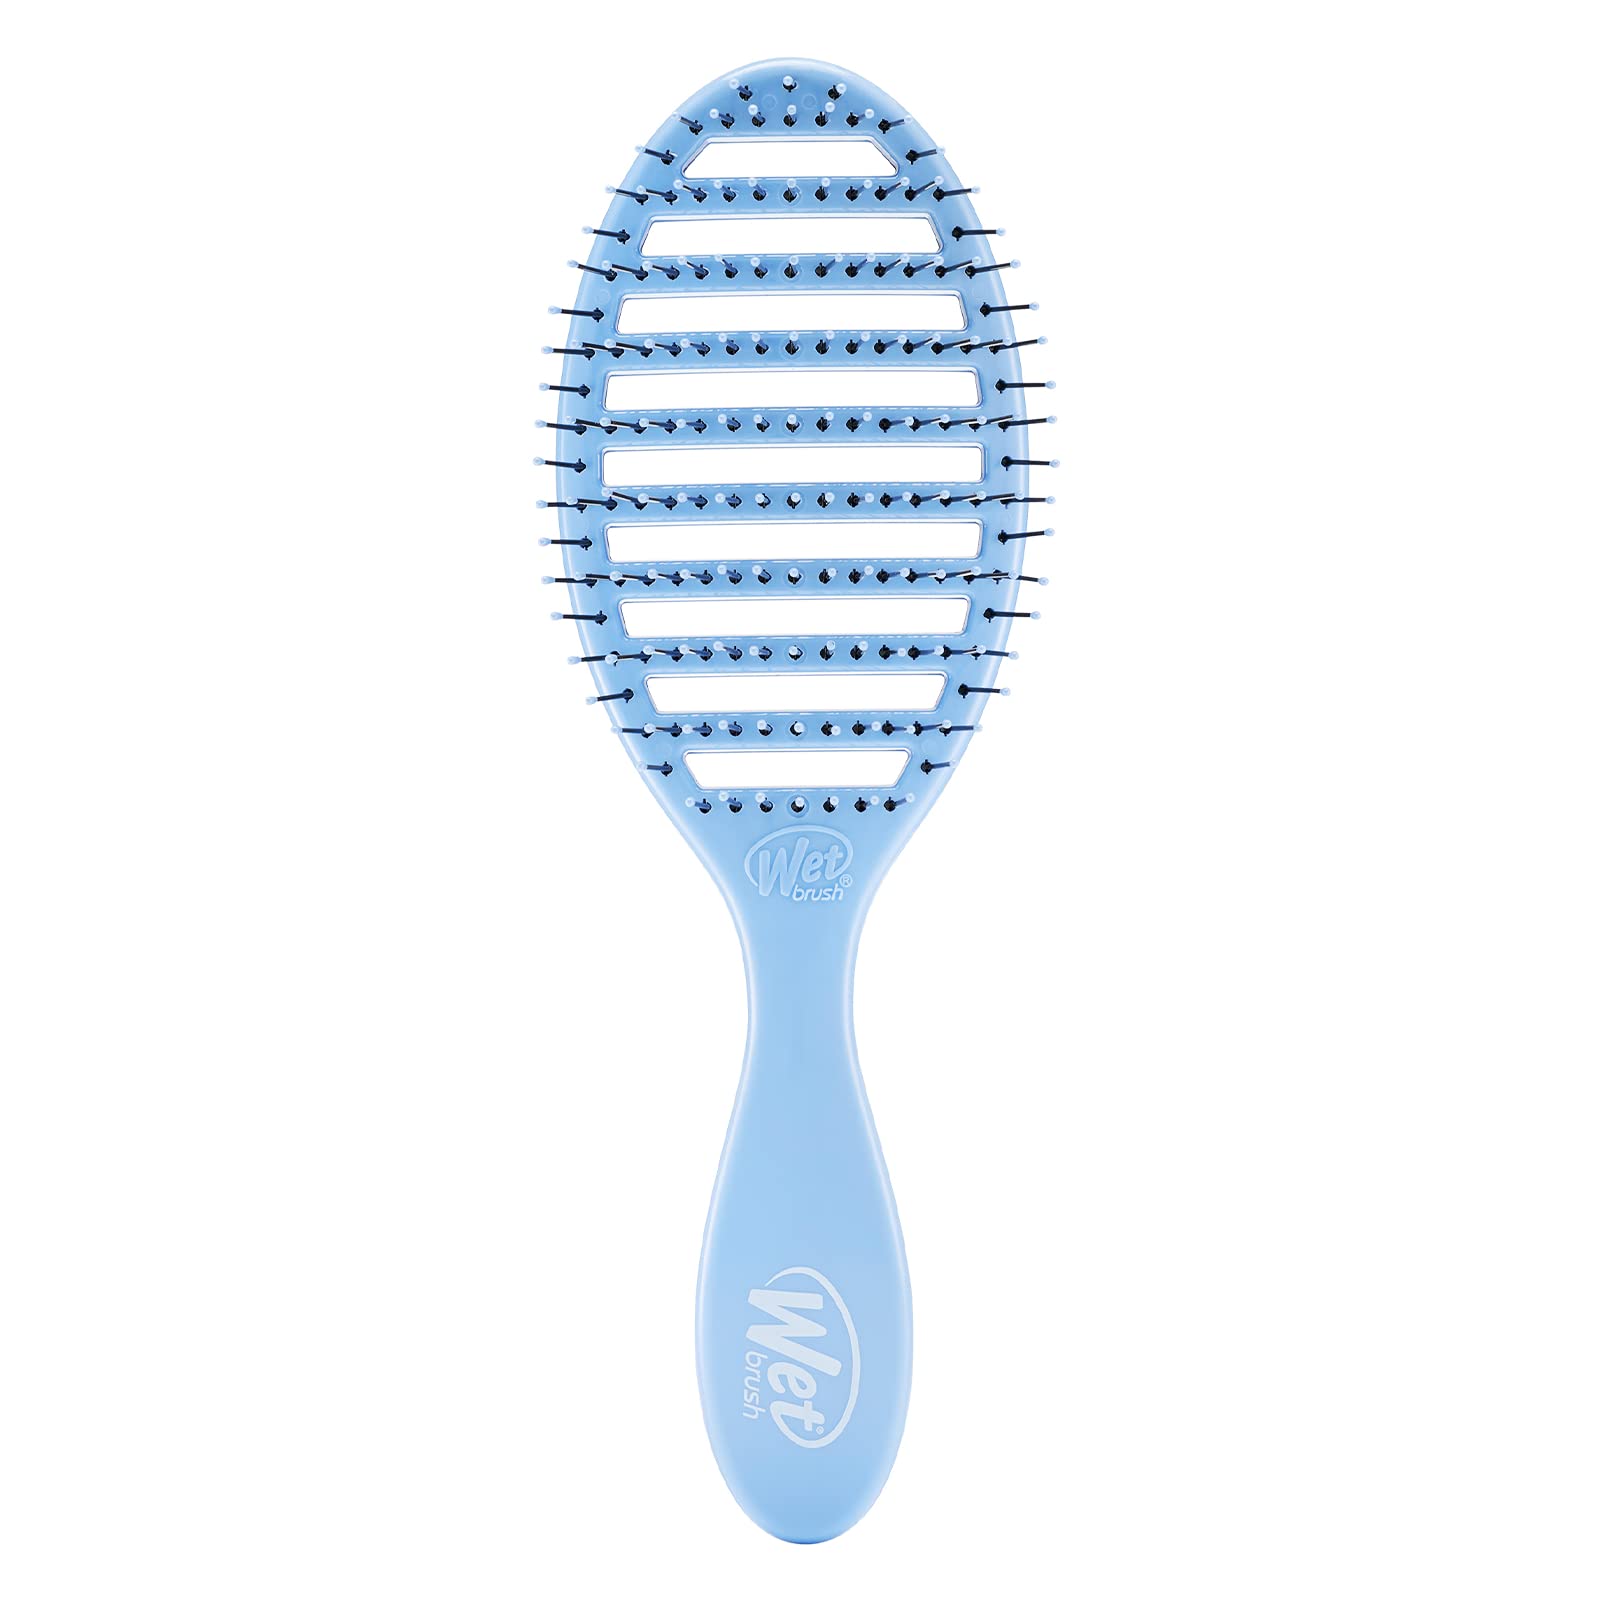 Wet Brush Speed Dry Hair Brush - Free Spirit, Sky - Vented Design and Ultra Soft HeatFlex Bristles Are Blow Dry Safe With Ergonomic Handle Manages Tangle and Uncontrollable Hair - Pain-Free